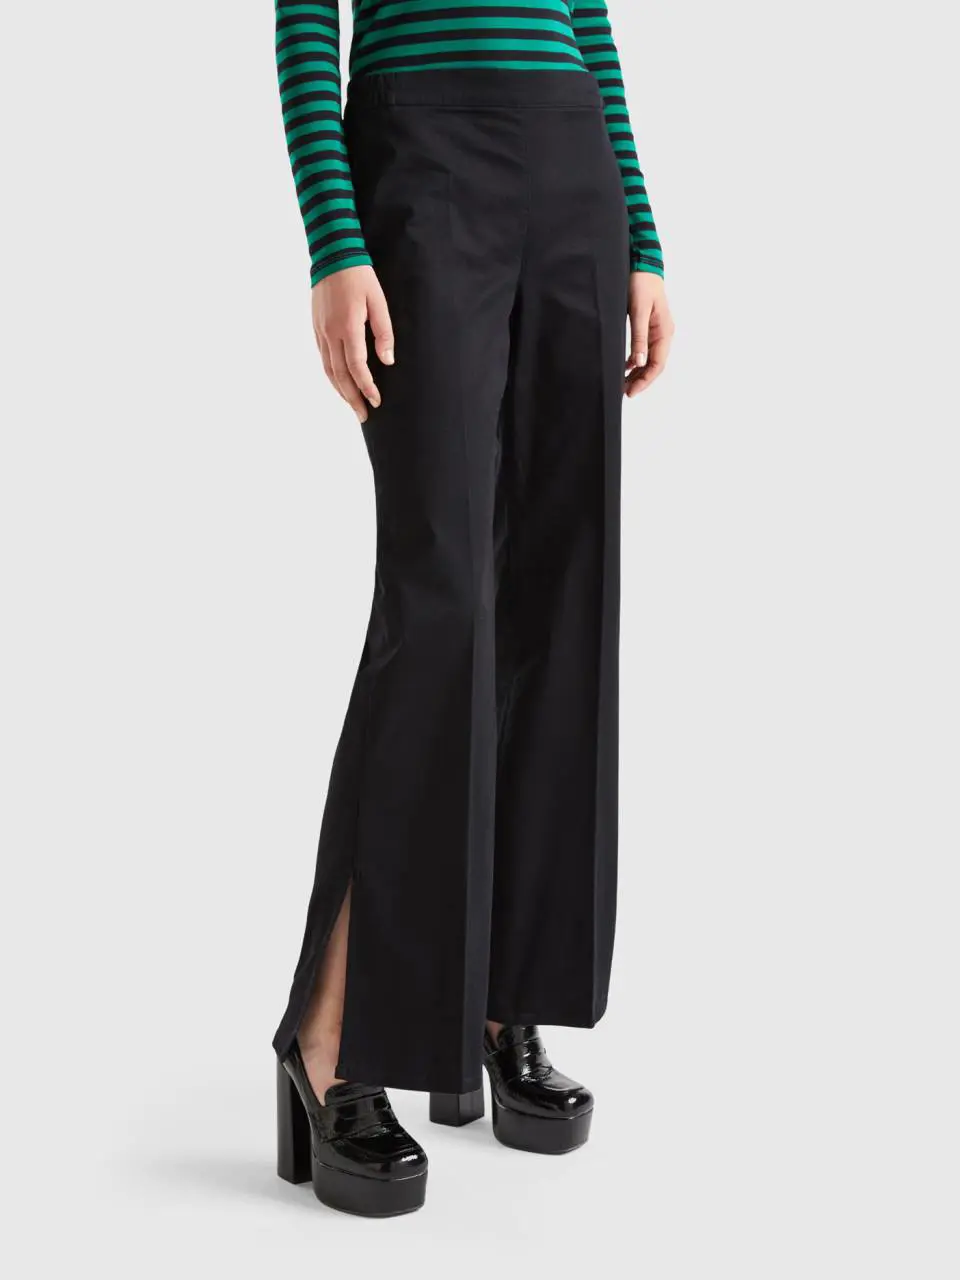 Benetton flared trousers with slits. 1